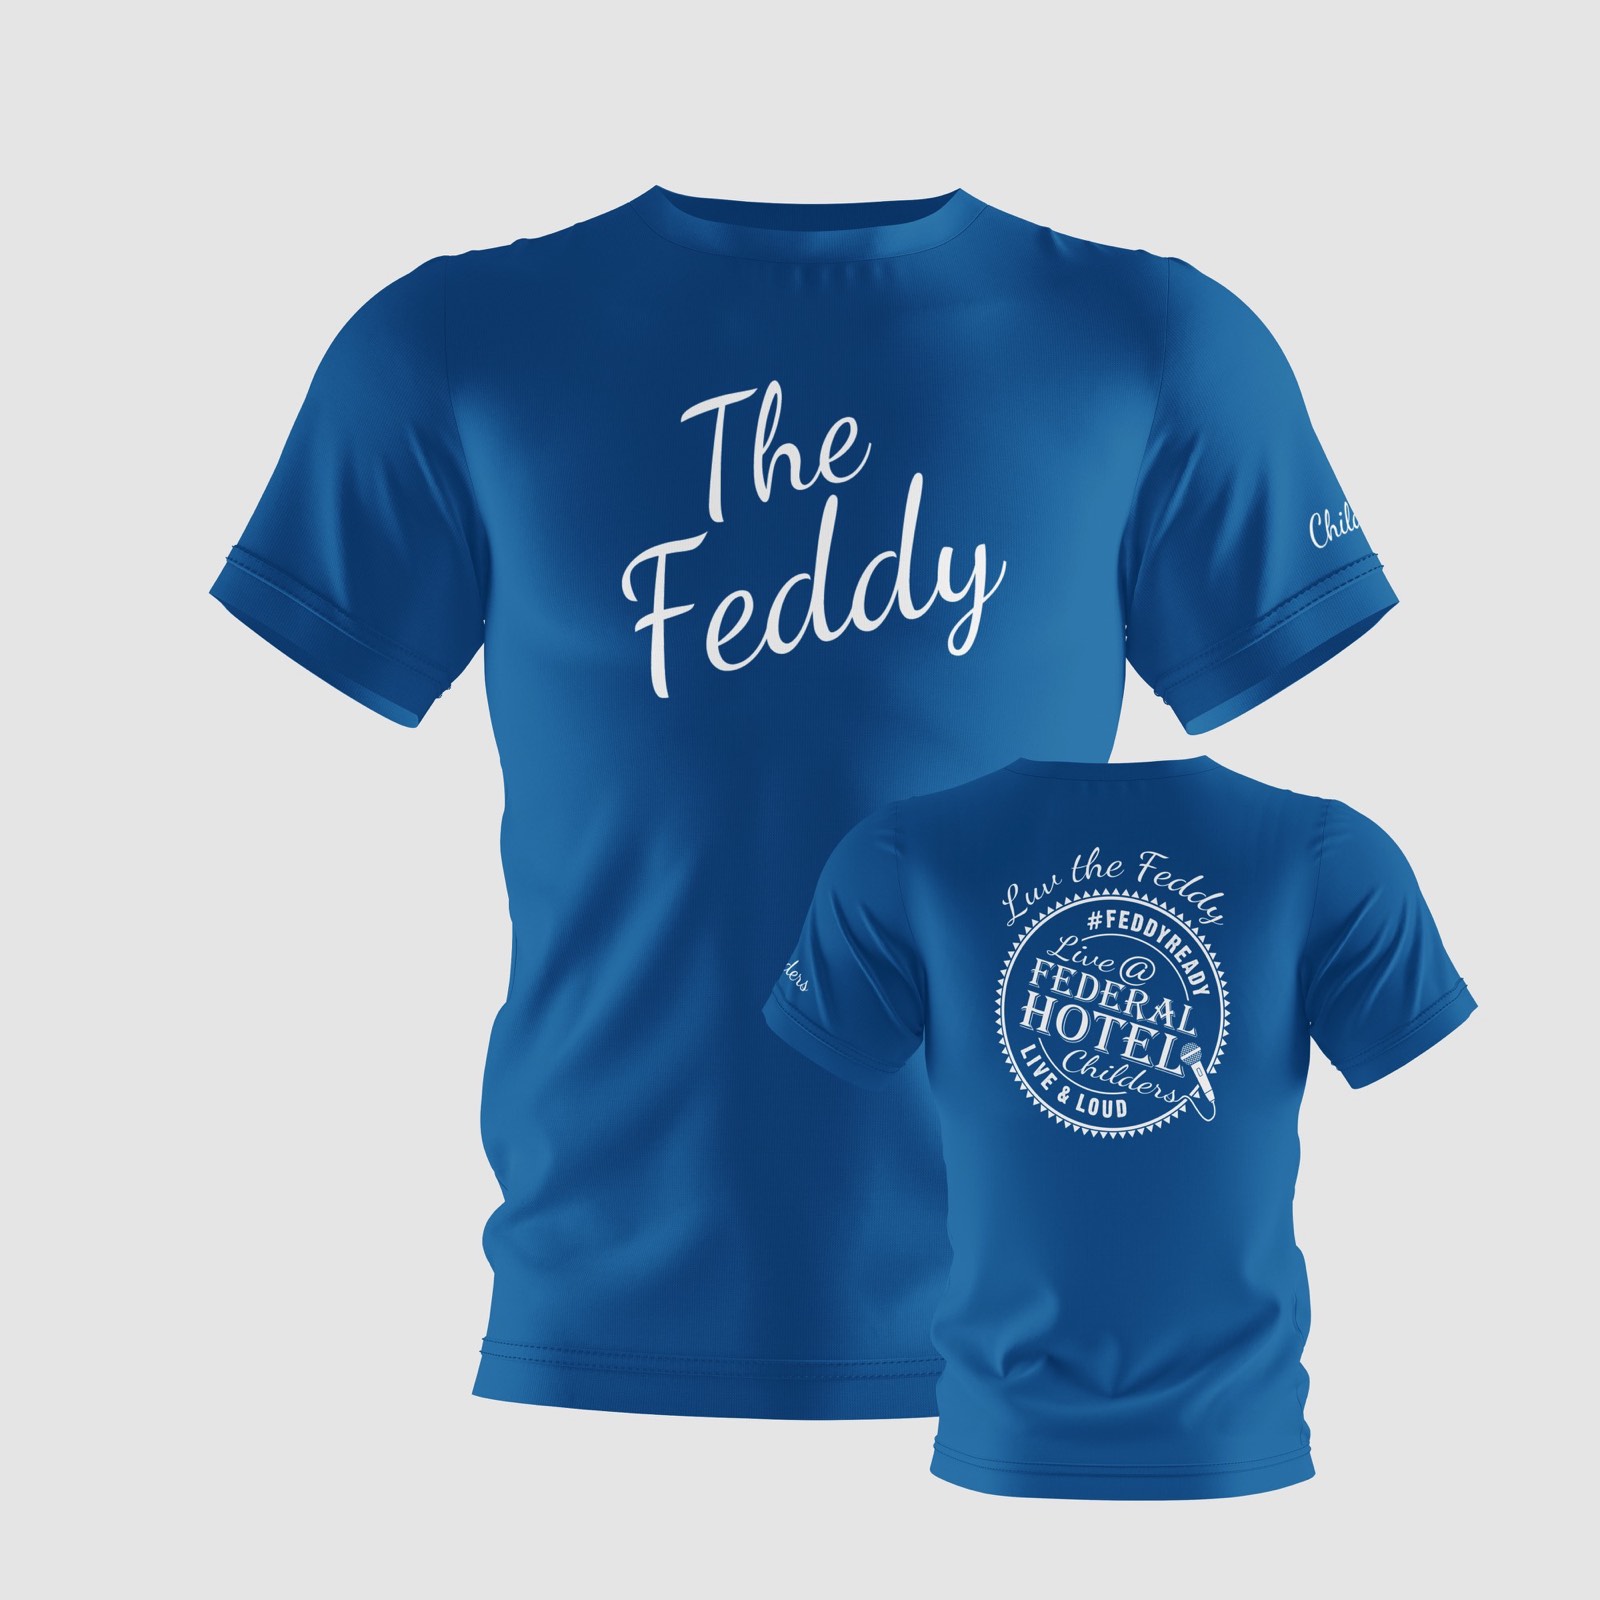 The Feddy printed T-shirt front and back - Blue